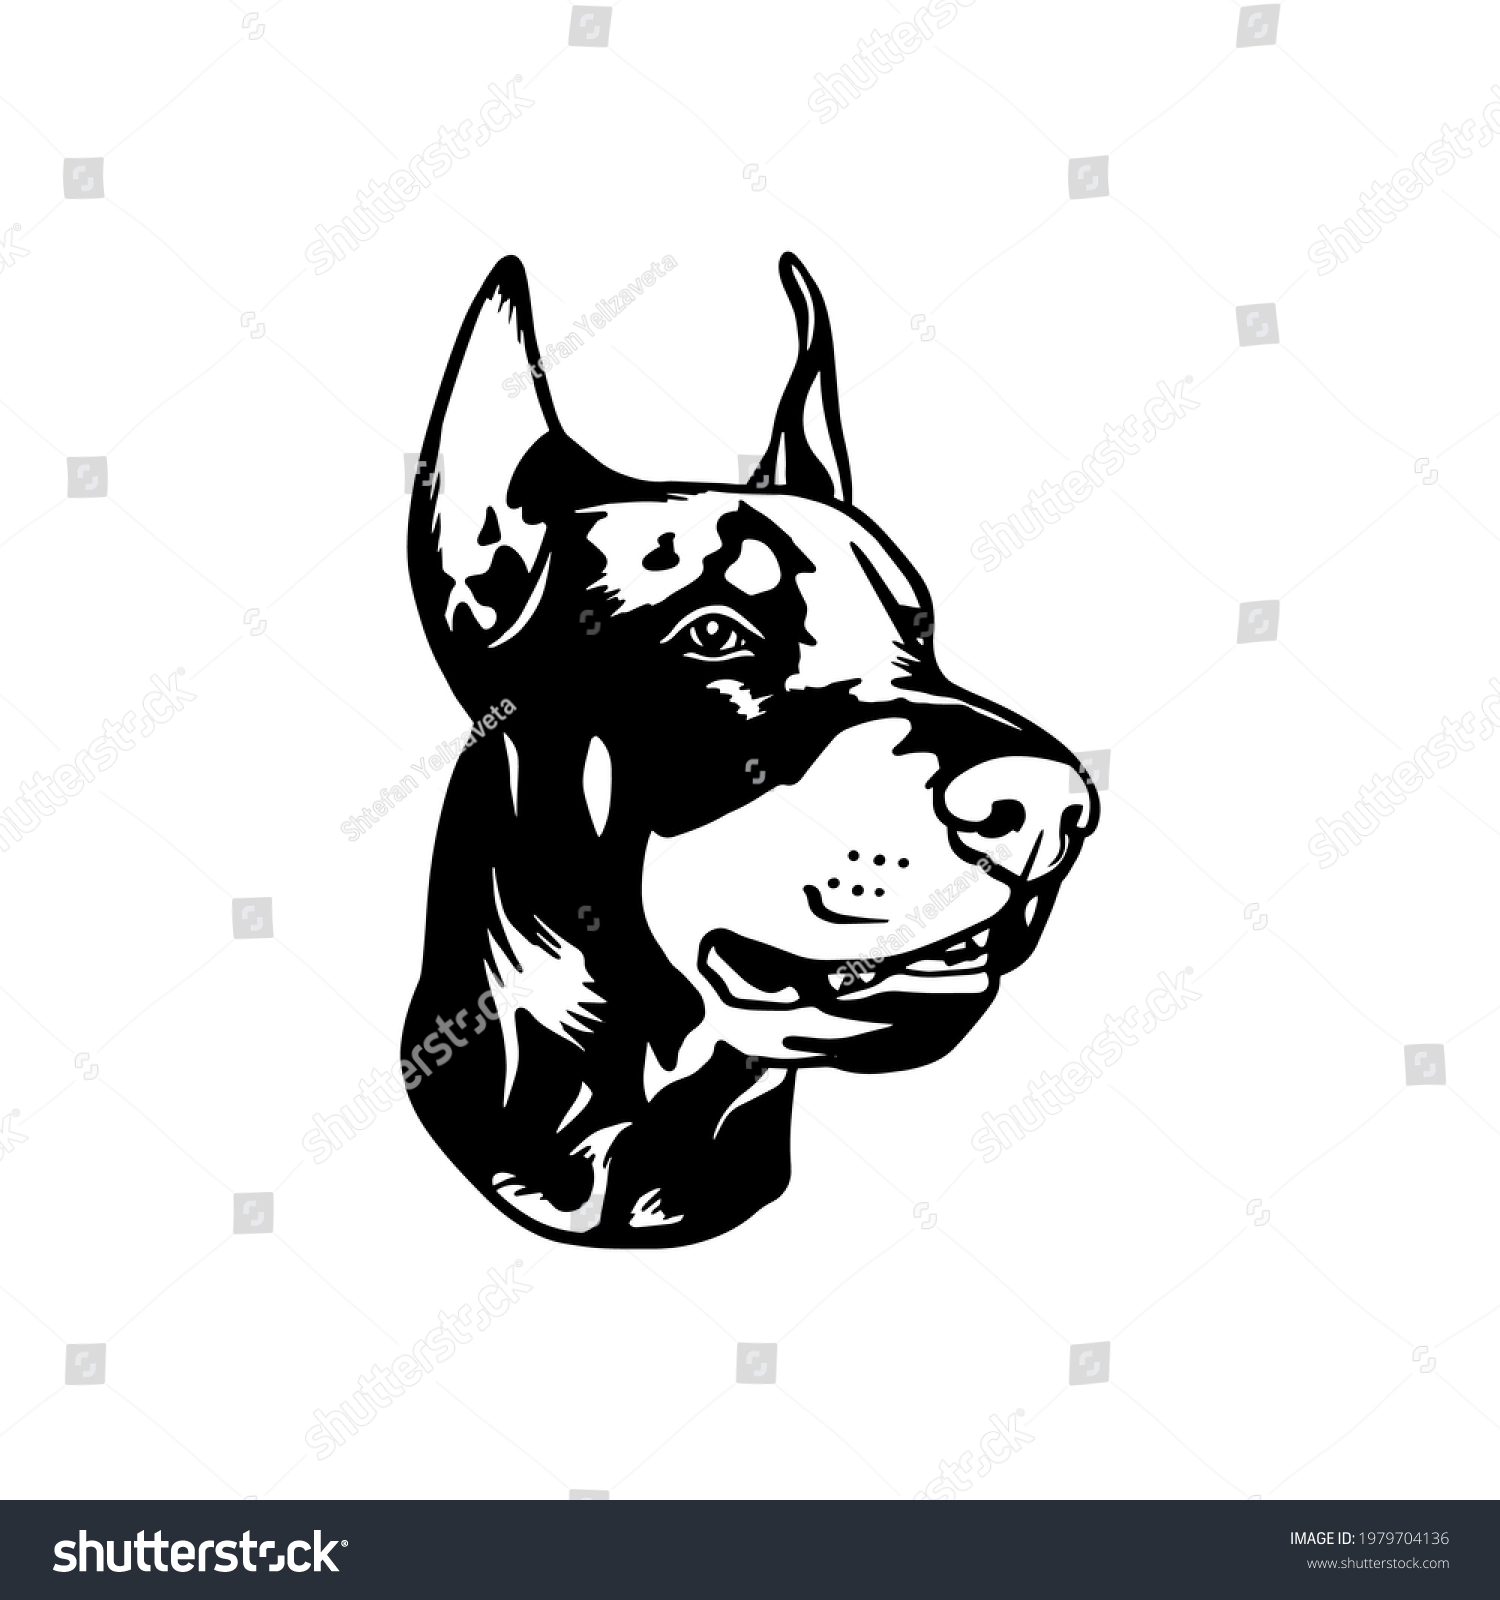 SVG of Doberman dog in graphic style. Creative illustrations
Clipart file for cutting vinyl decal and printing svg